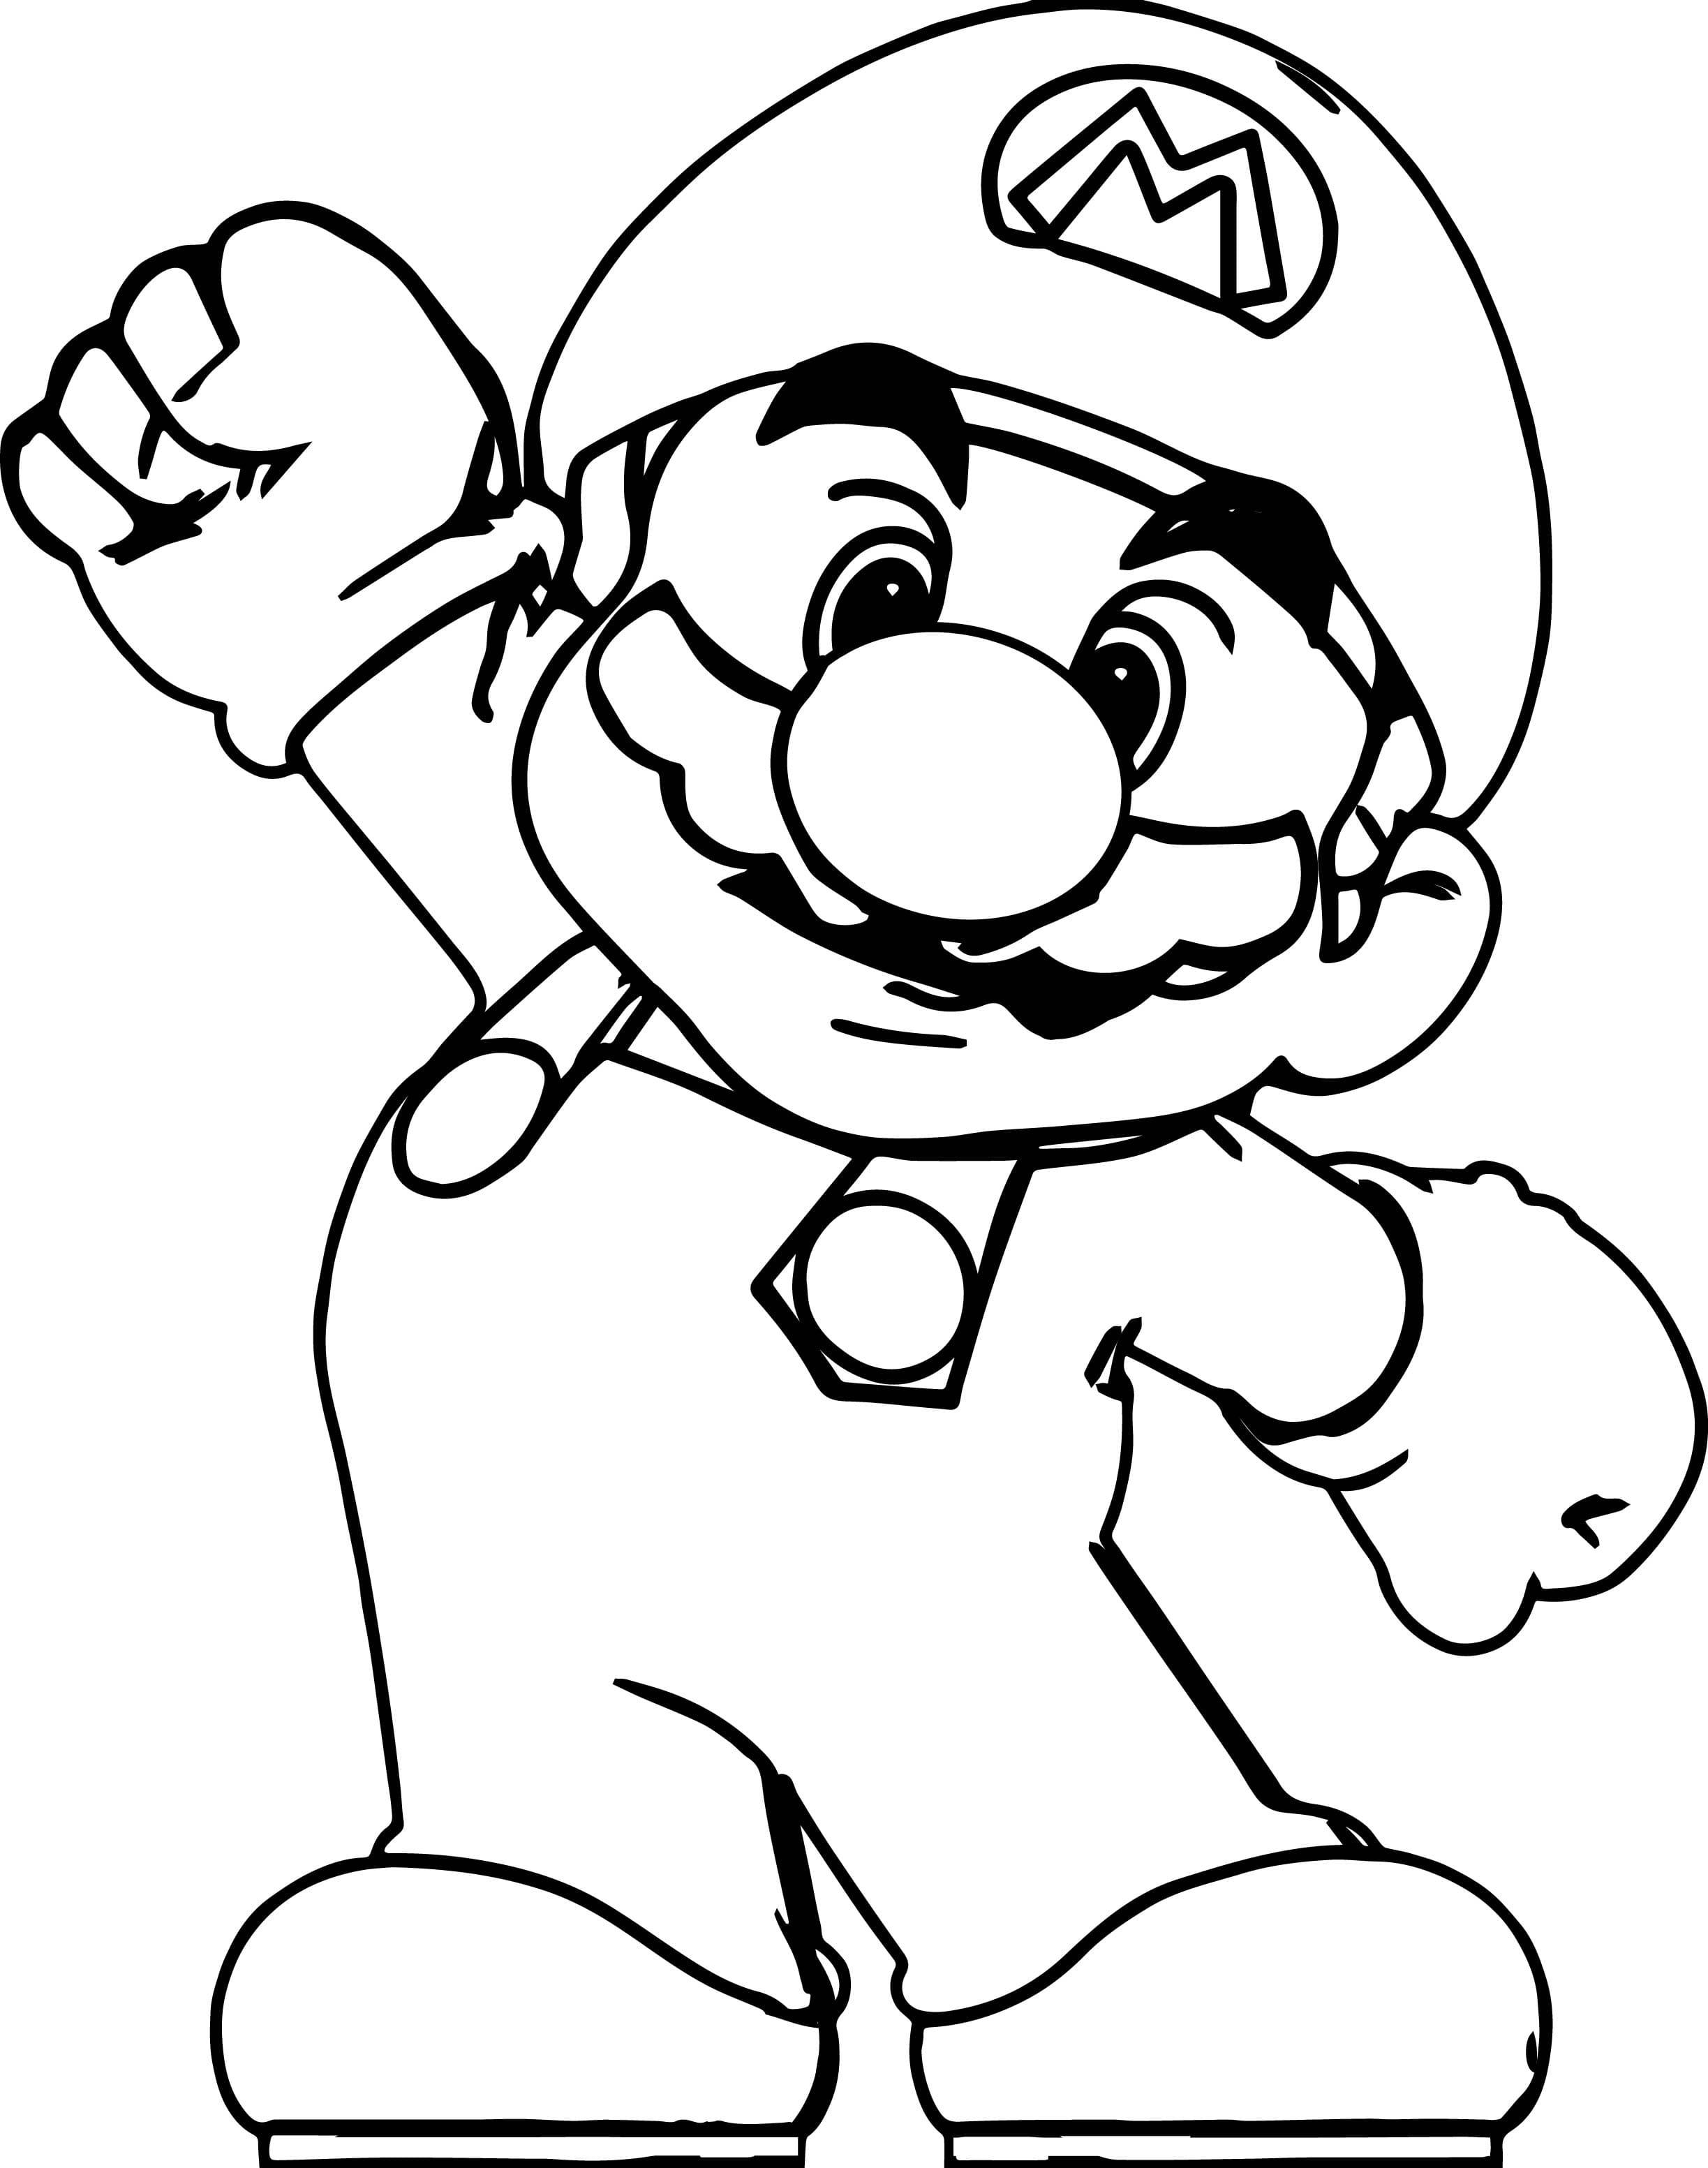 Coloring pages of the Mario brothers and their friends. 